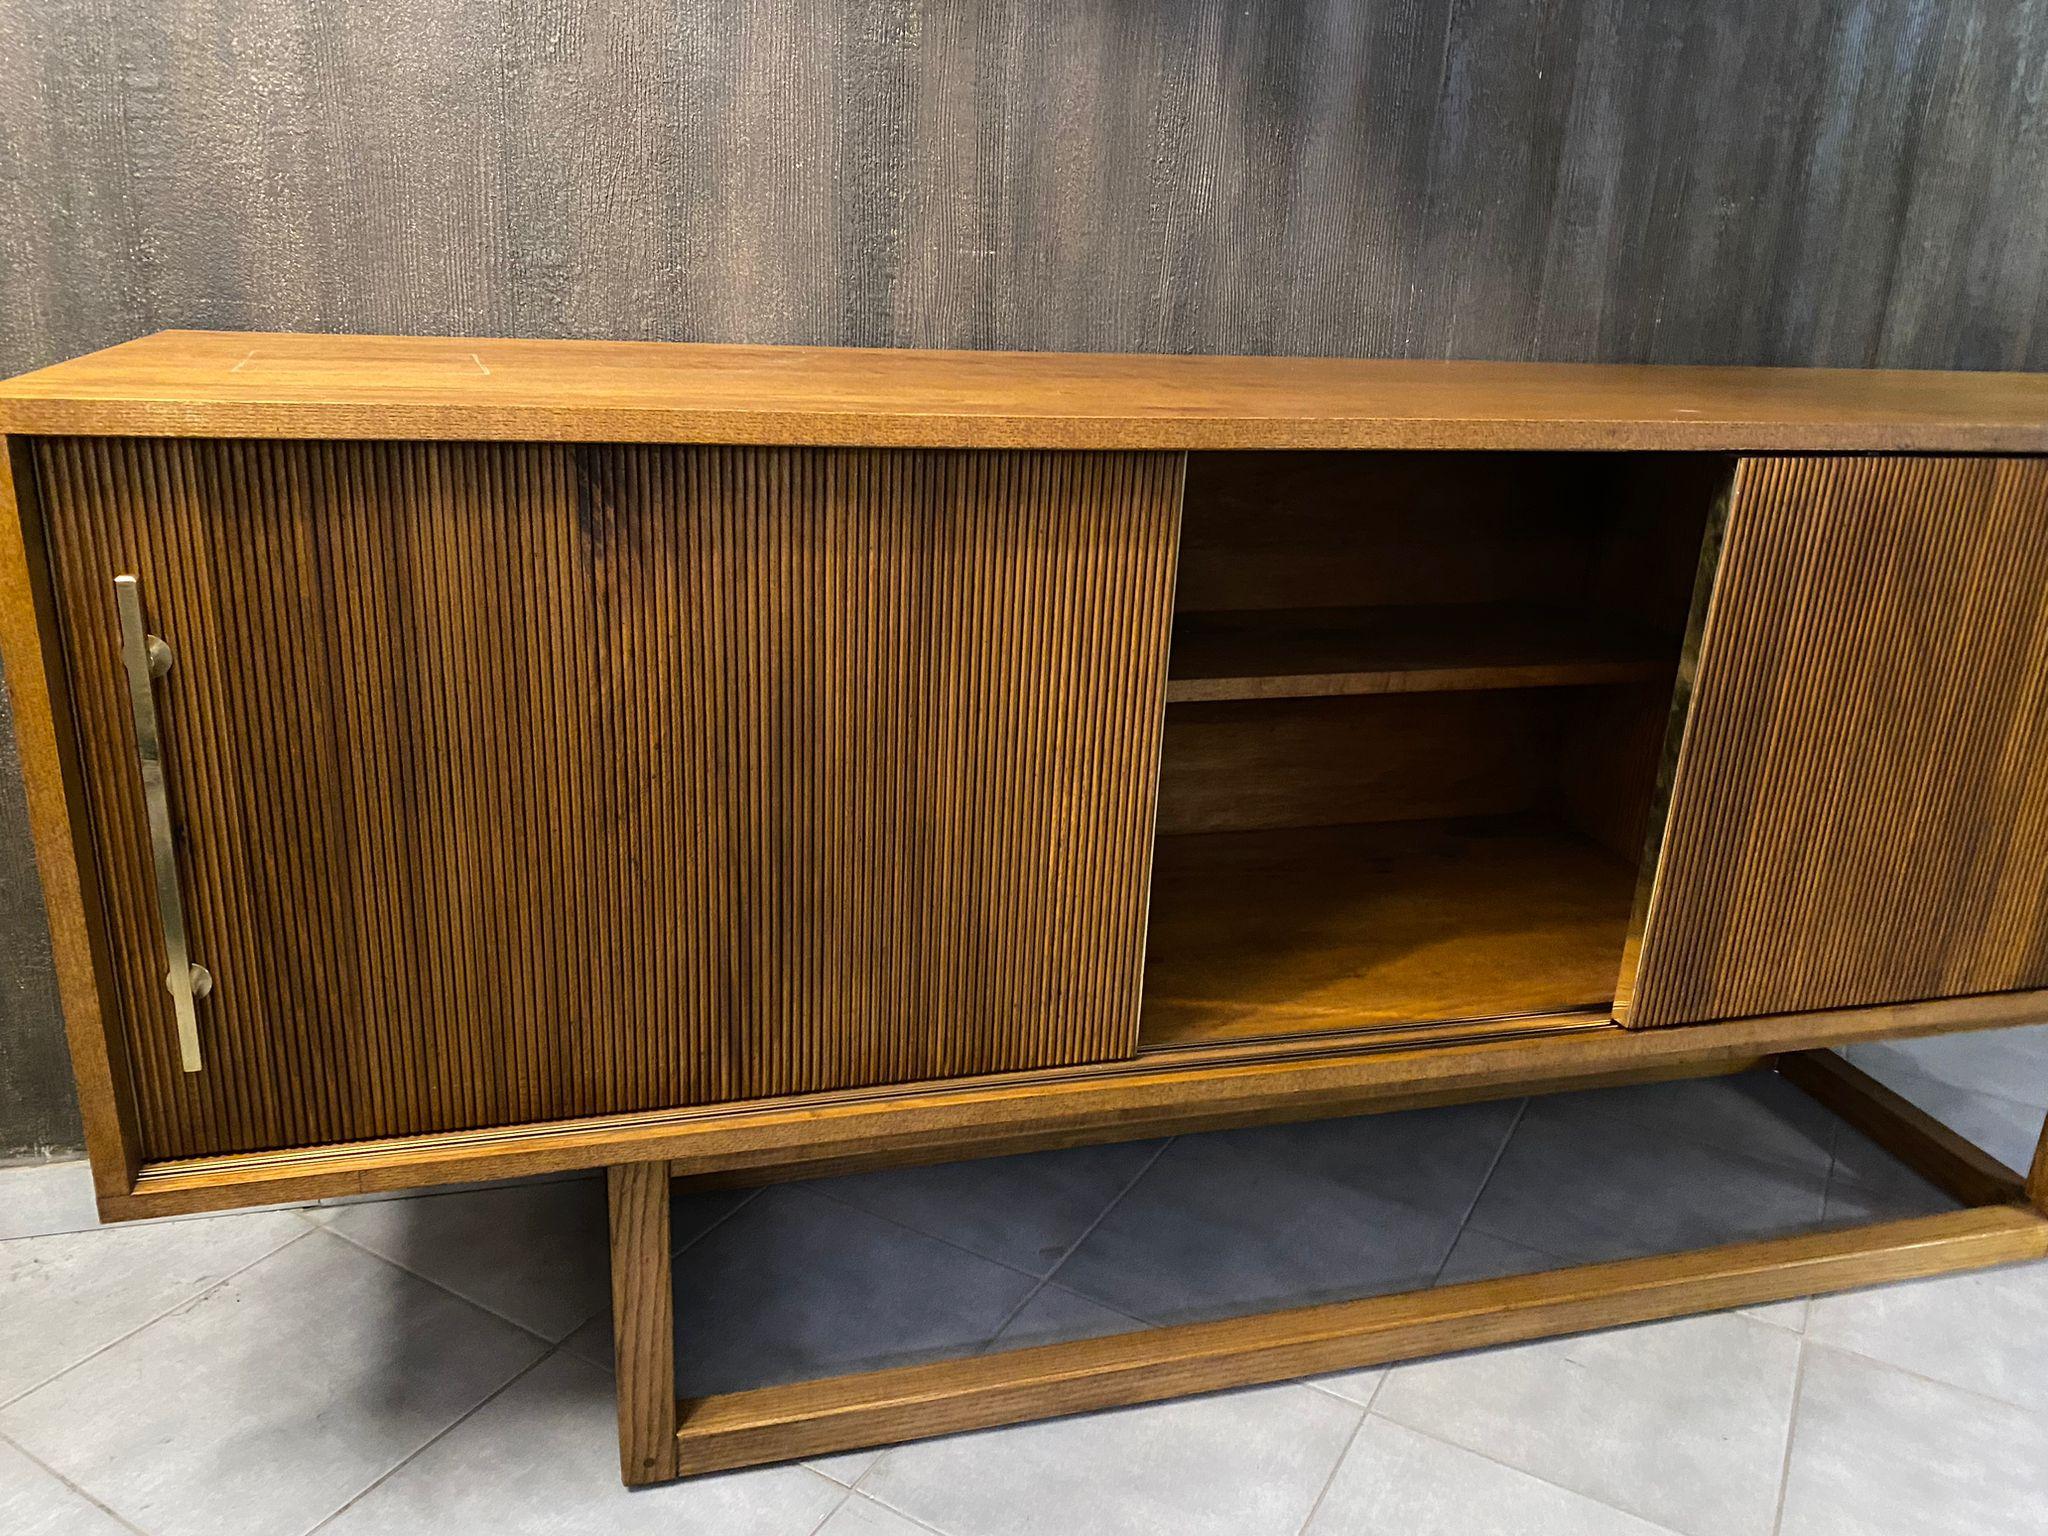 Beautiful sideboard designed and handcrafted by us with structure and interior in solid wood, a big rectangular leg , 3 sliding doors with vertical moldings and finishes in brass.
It is an object of high quality and refinement, ideal for giving